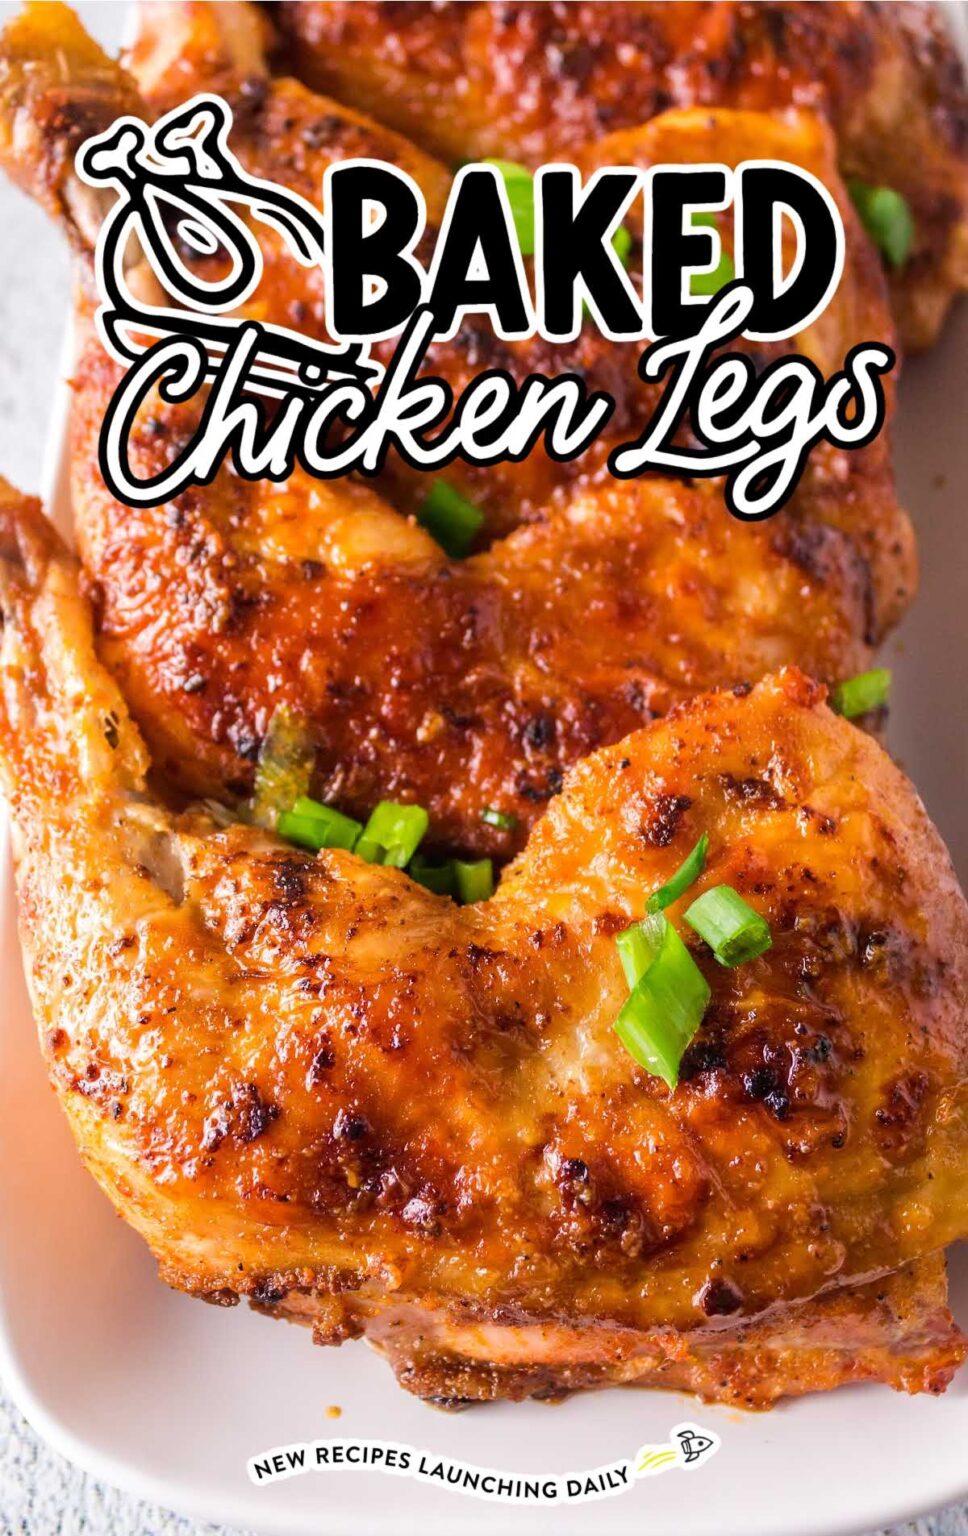 Baked Chicken Legs - Spaceships and Laser Beams